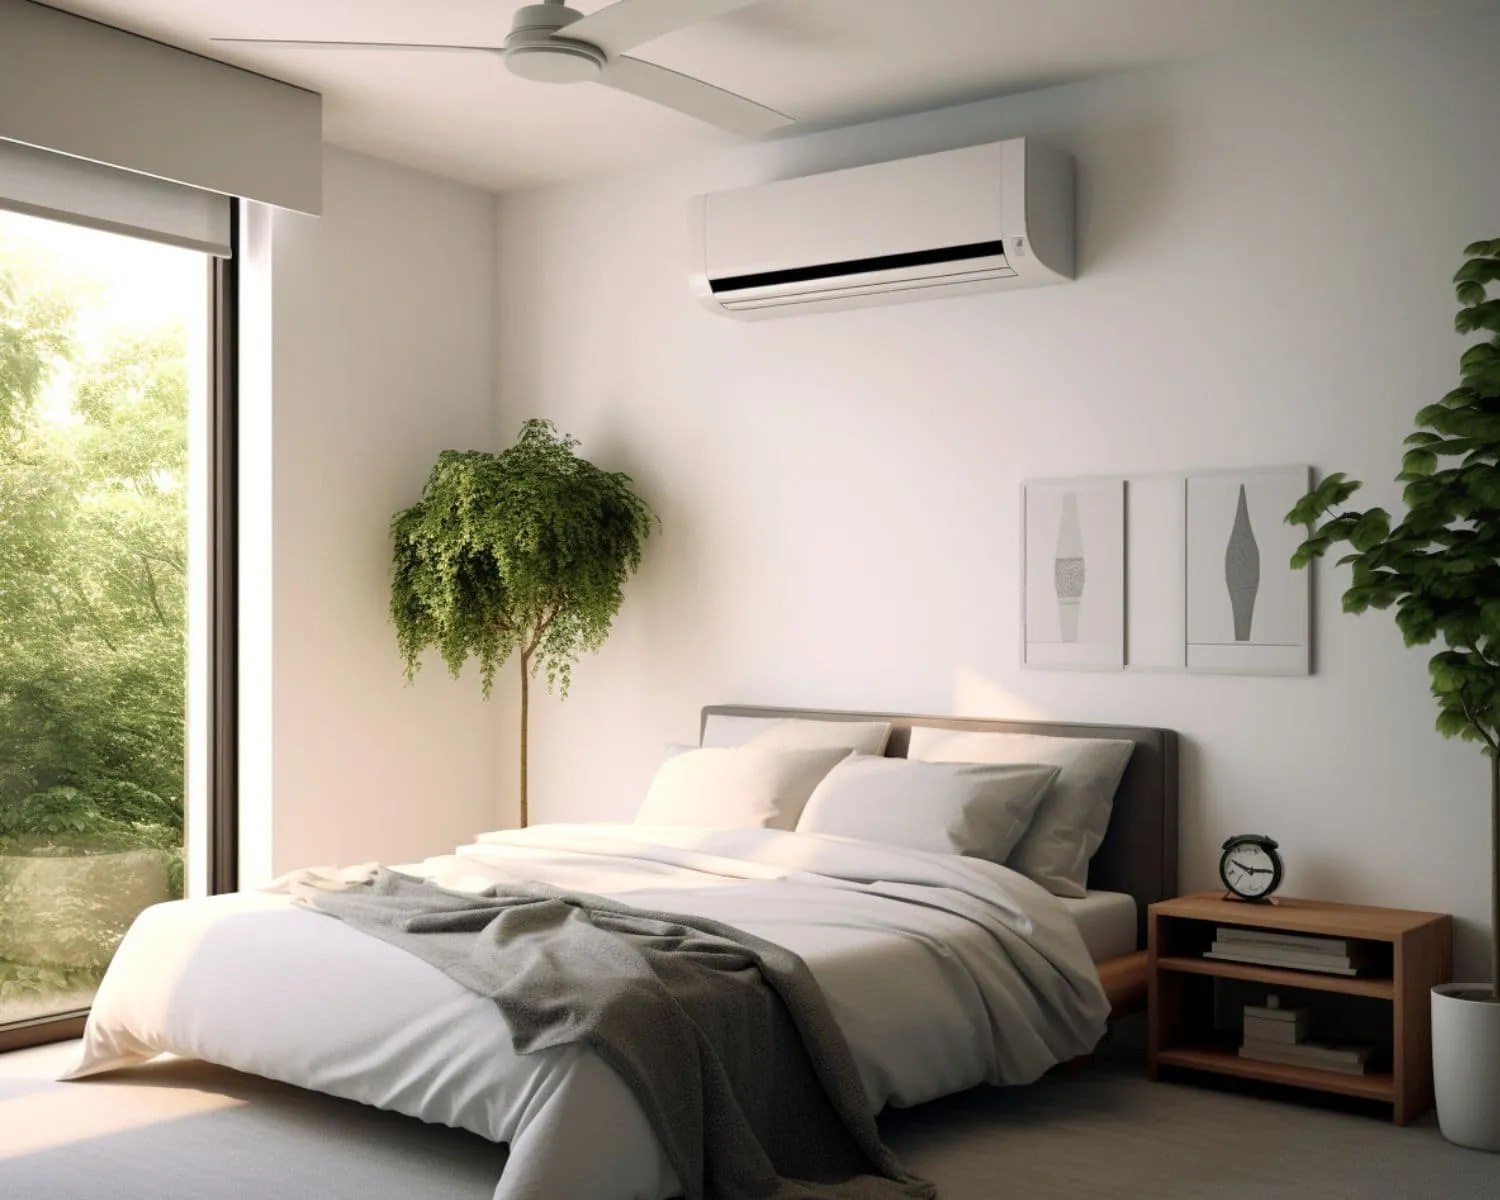 Where To Install An Air Conditioner In An Apartment?